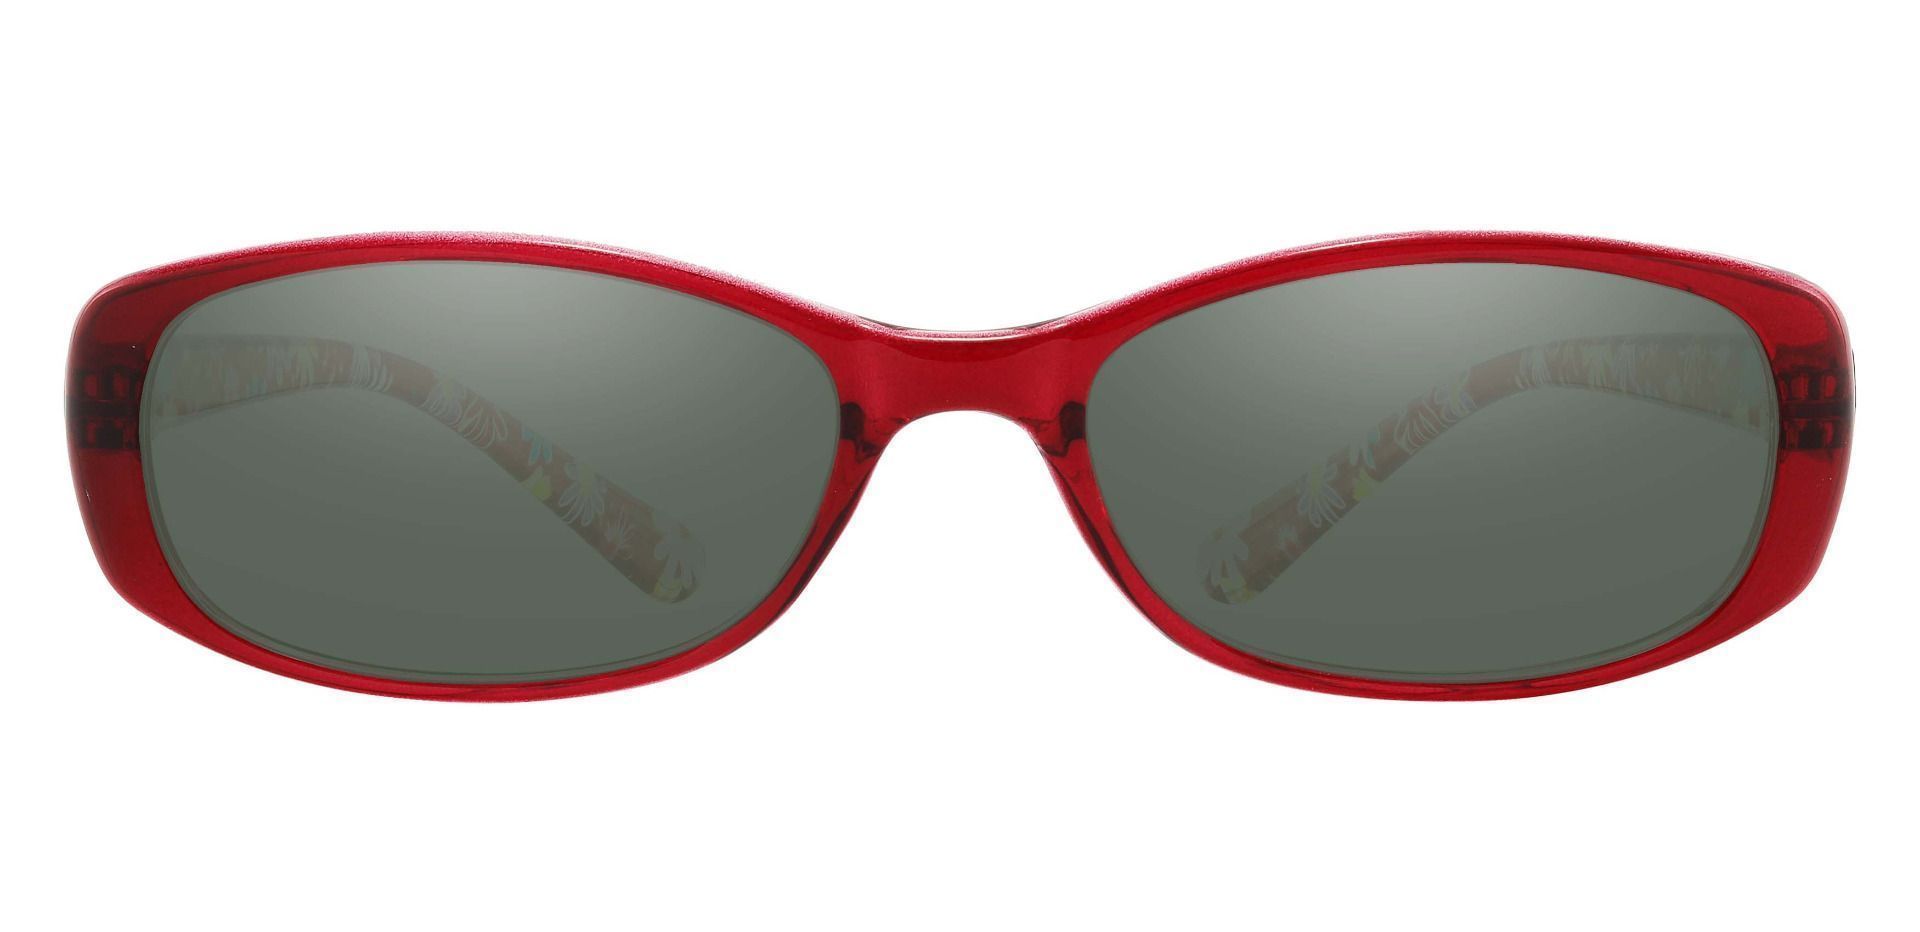 Bethesda Rectangle Lined Bifocal Sunglasses - Red Frame With Green Lenses